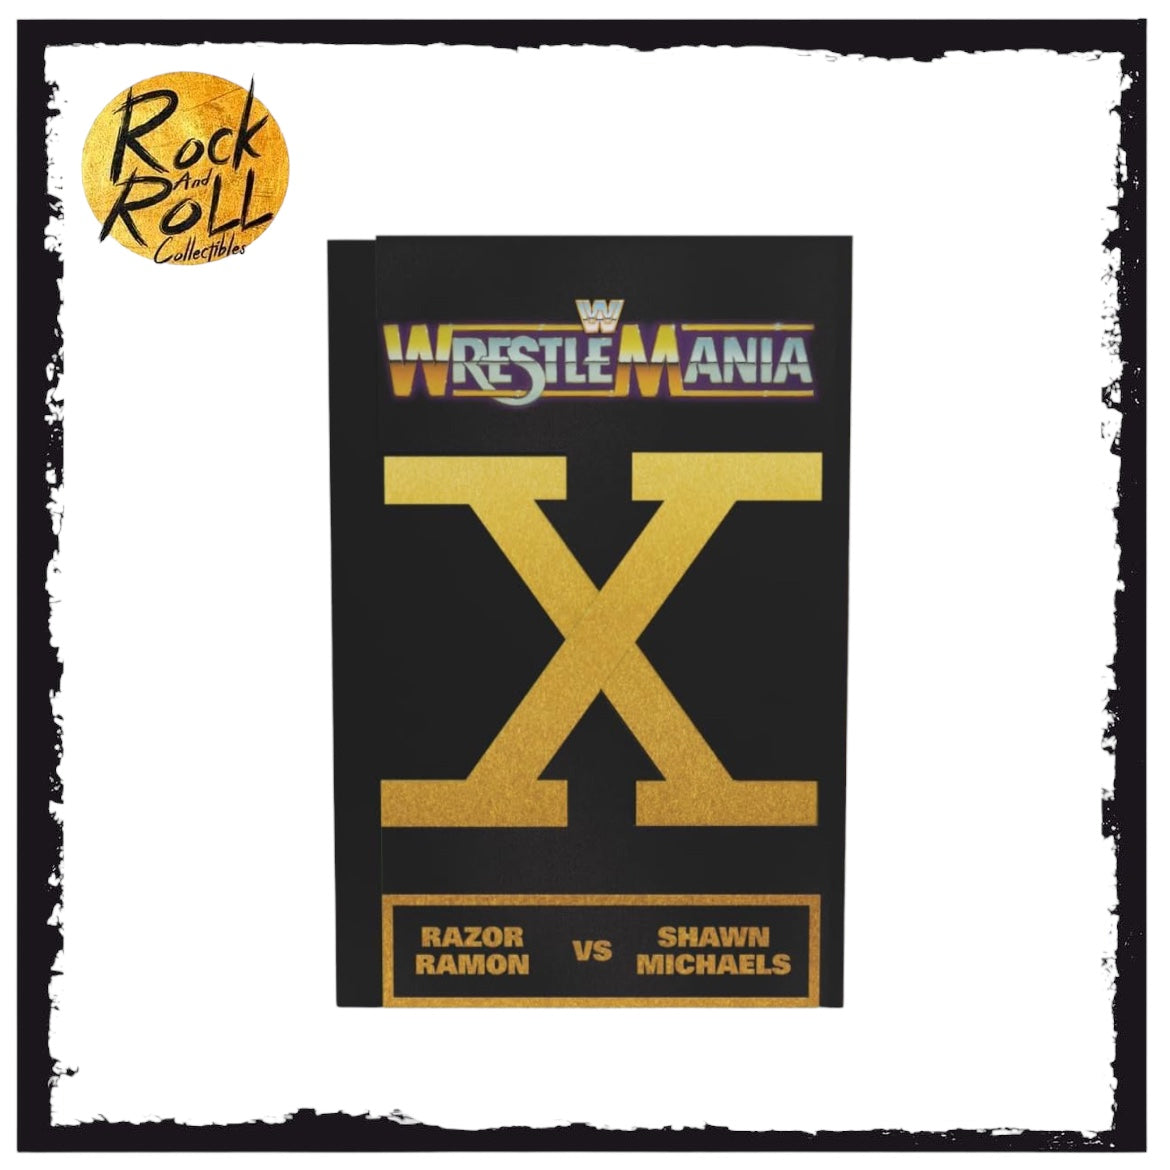 WWE Elite Action Figures & Accessories, Wrestlemania X Ladder Match Collectible Set with Shawn Michaels & Razor Ramon - PRE ORDER